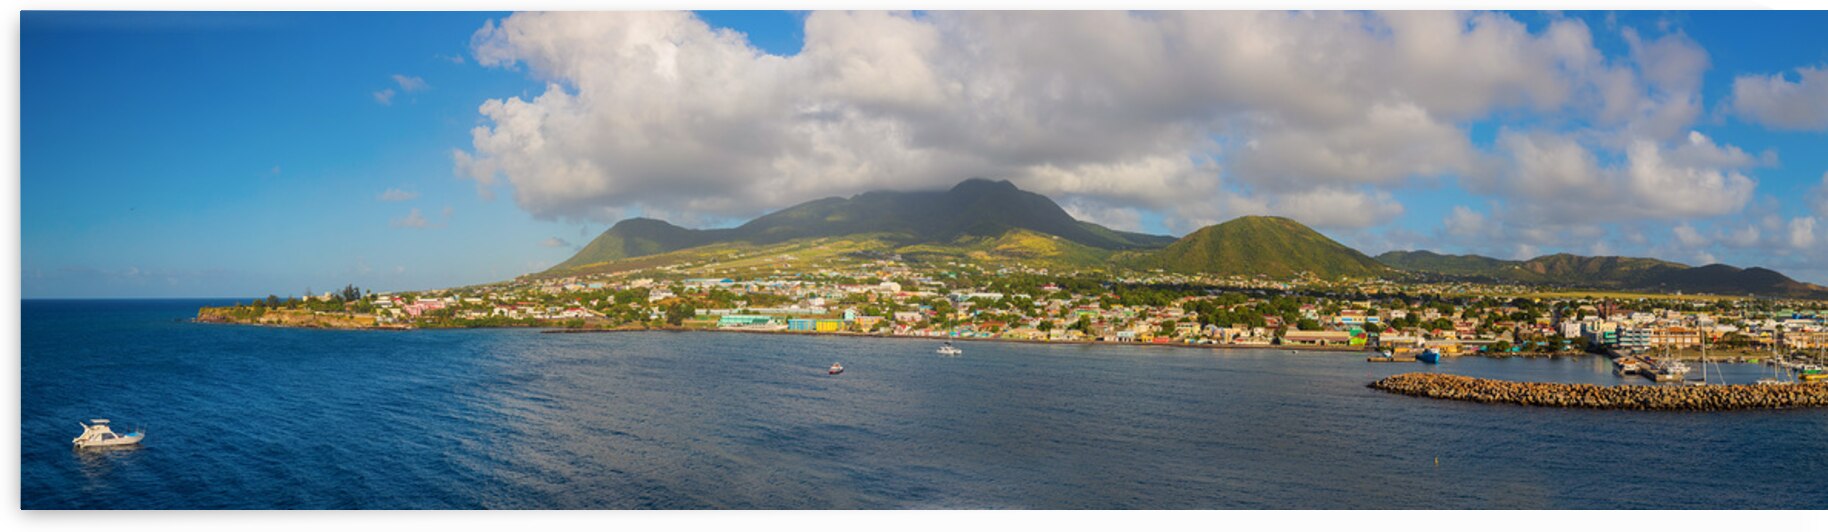 Beauty of the Caribbean island of St. Kitts by Bo Insogna